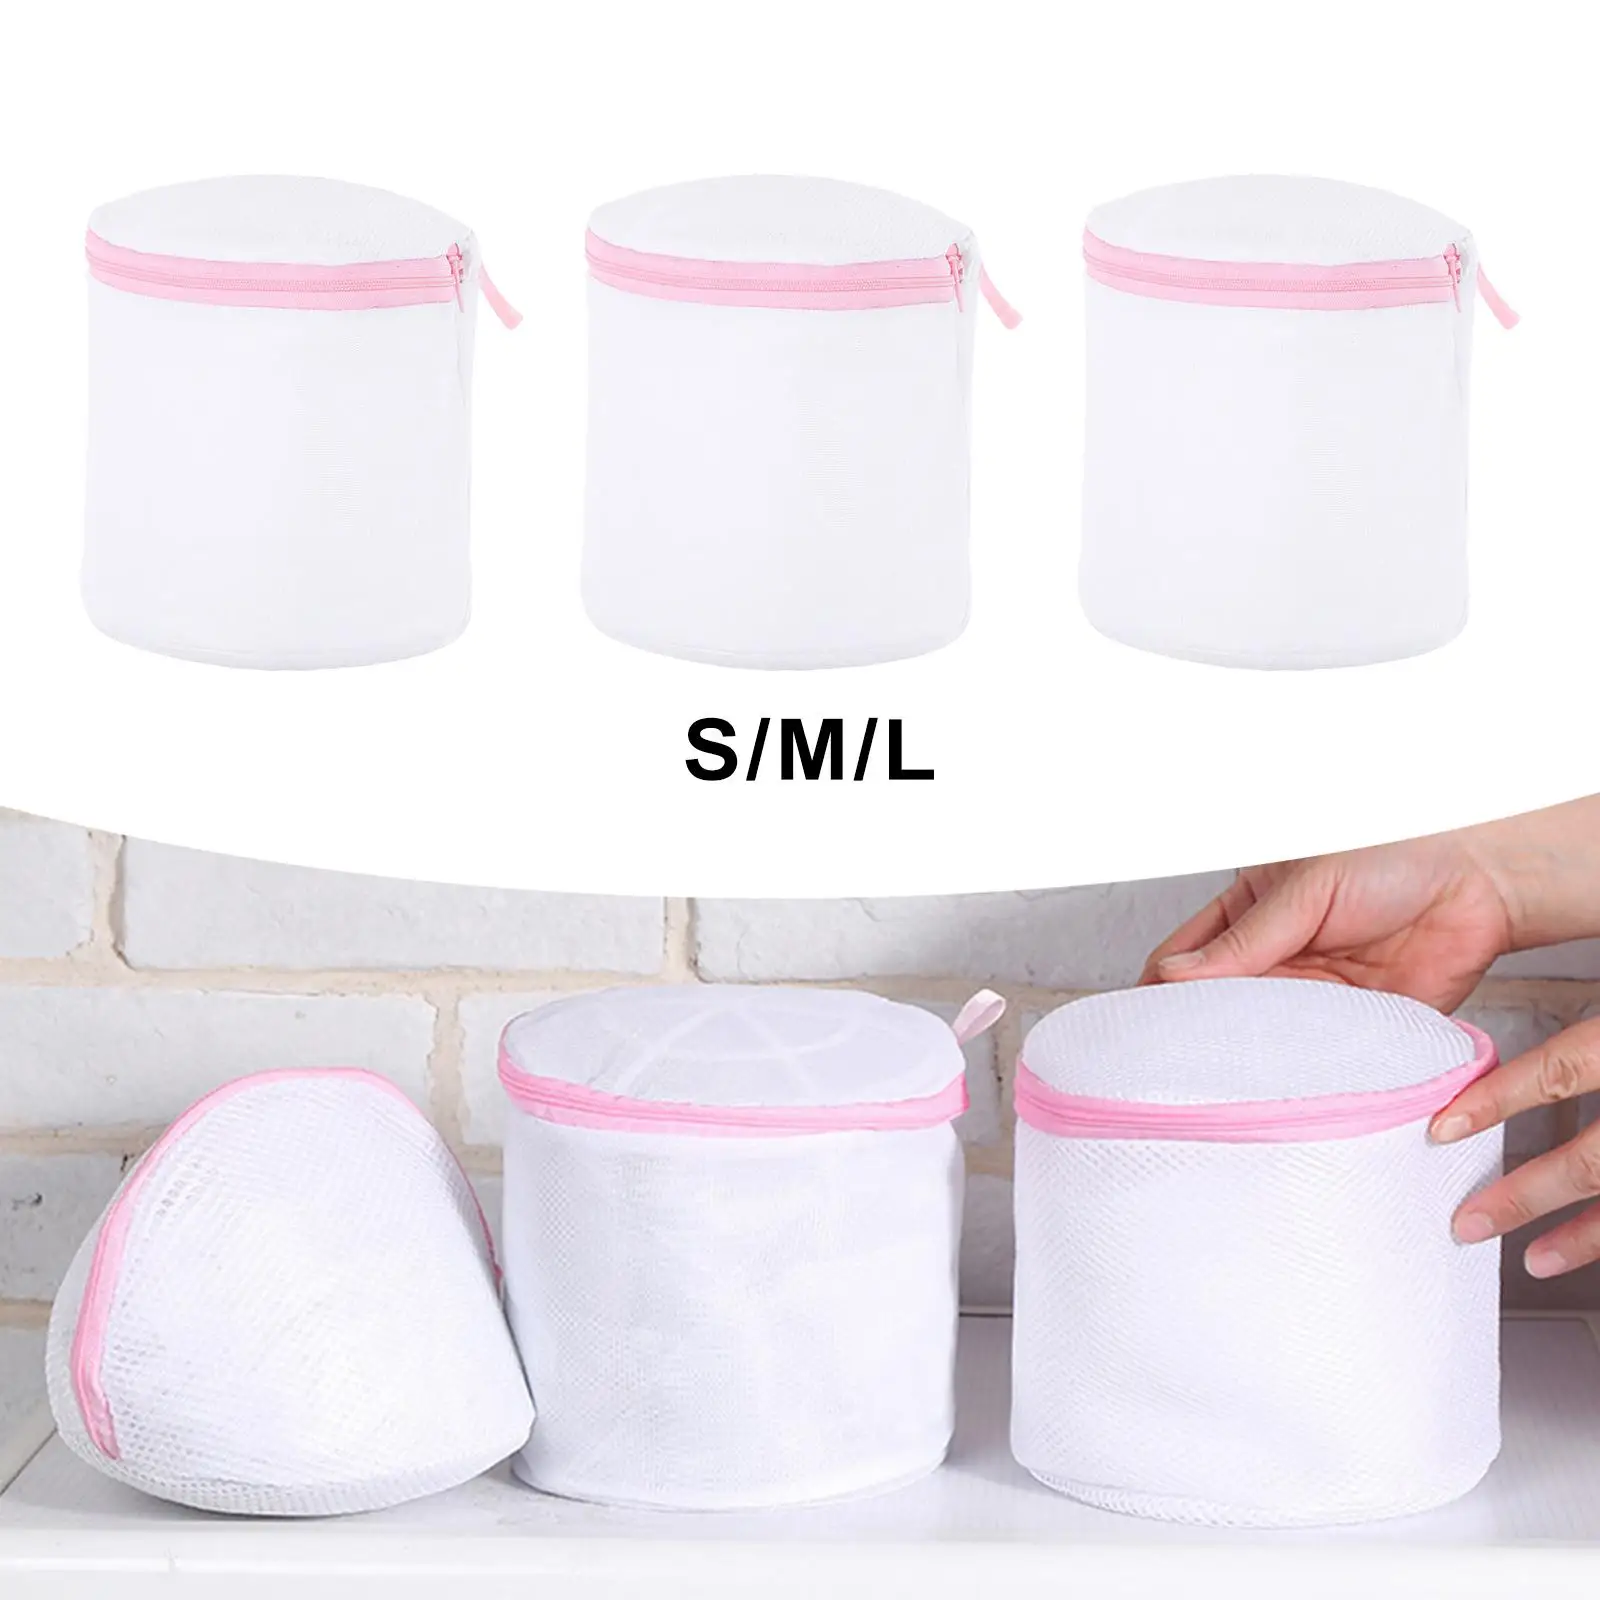 3 Pieces Wash Bag Clothes Organizer Socks Mesh Laundry Net Bags for Stocking